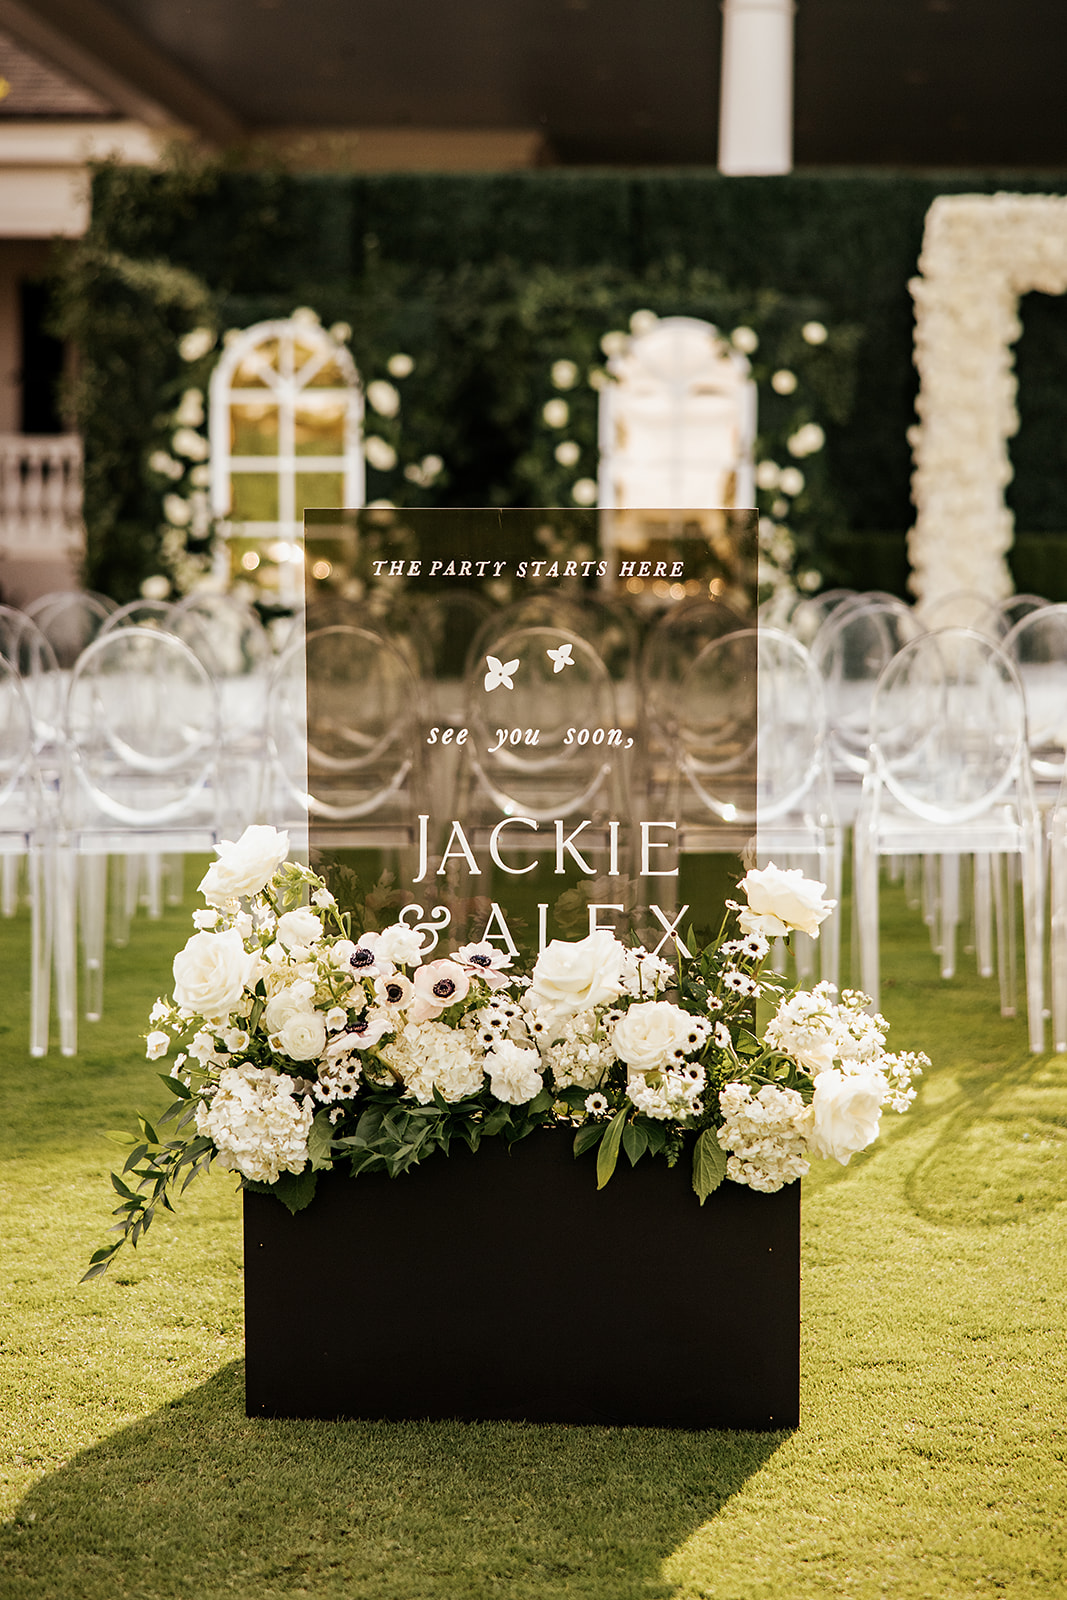 Jackie-and-Alex-ceremony-sign